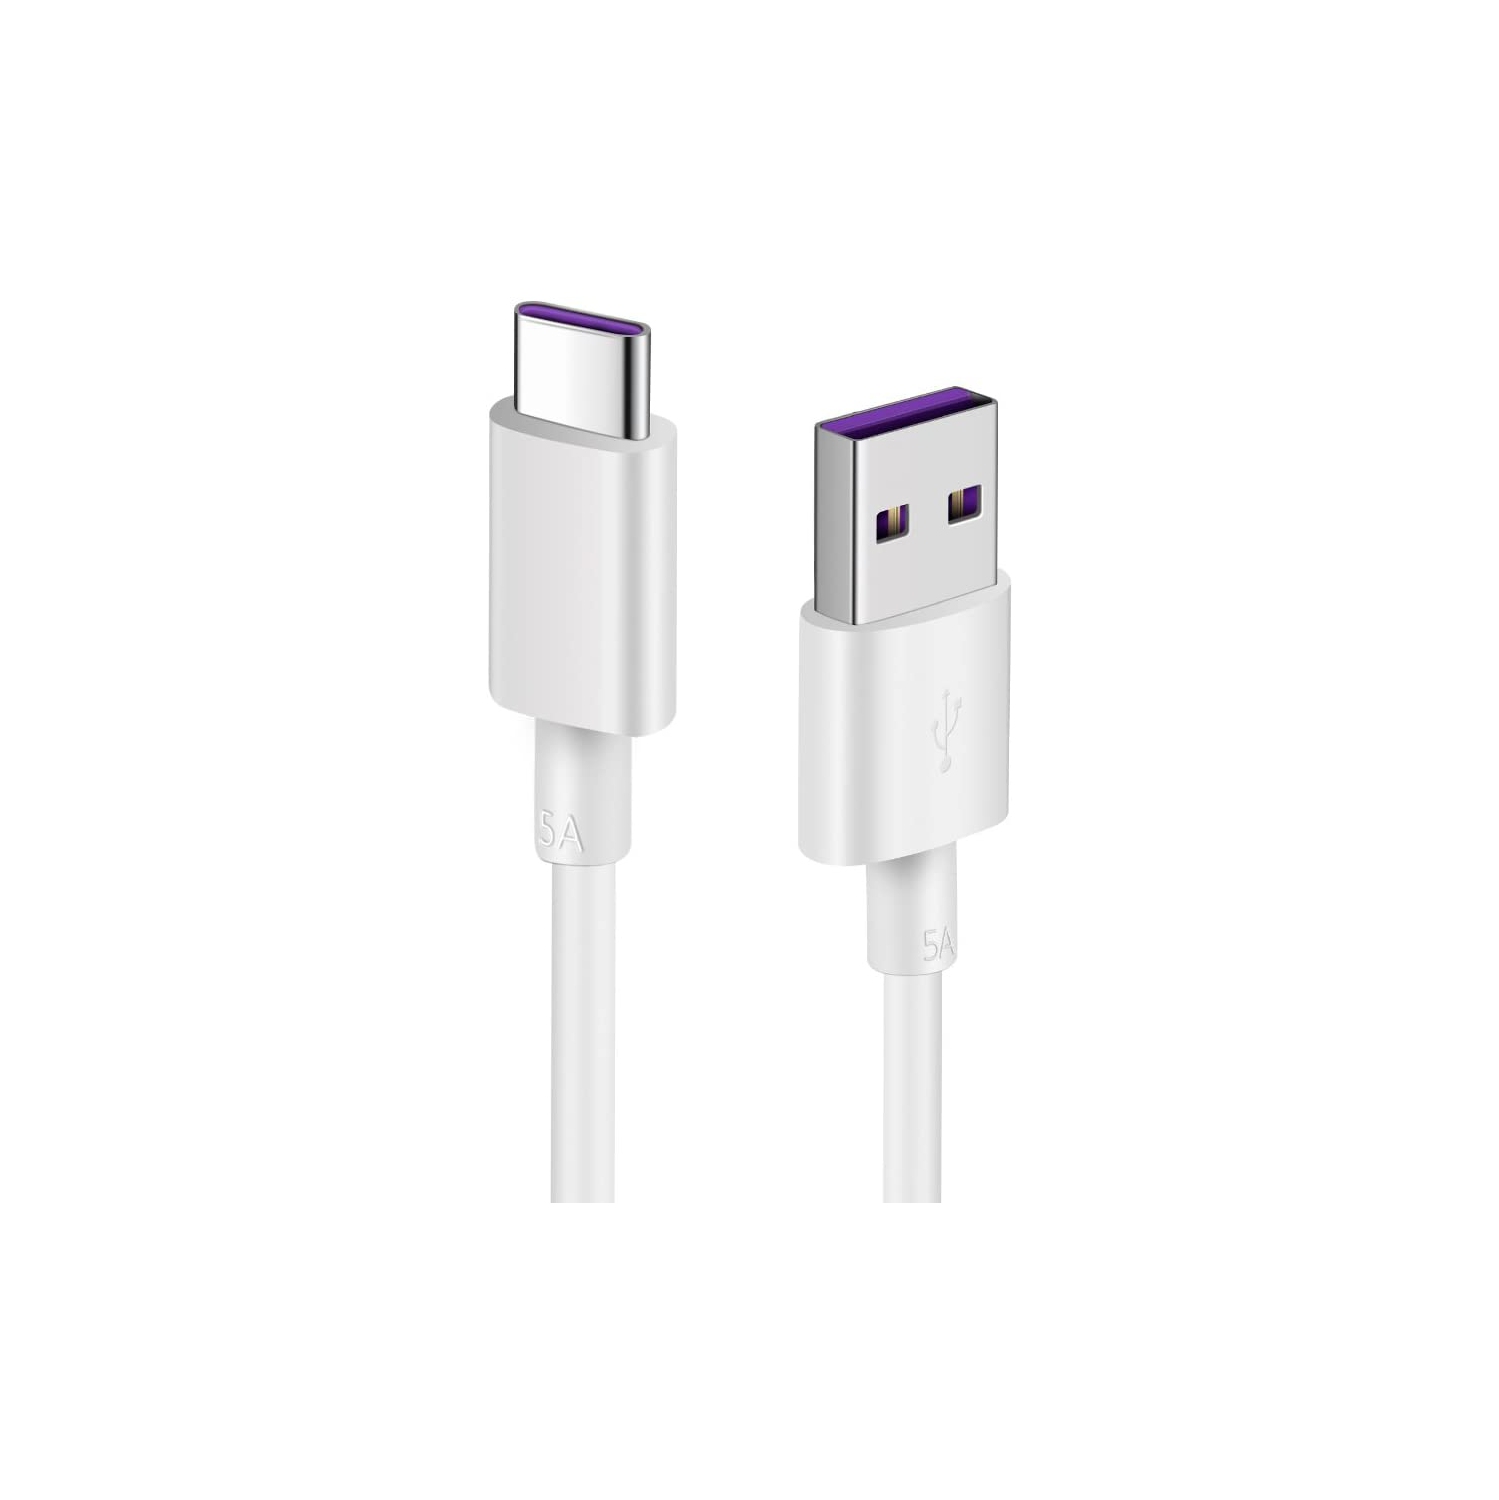 YA for Huawei 5A SuperCharge USB Type C Cable, USB C SuCooper Charger Cable,Fast Charge Type C Charger Cable Super